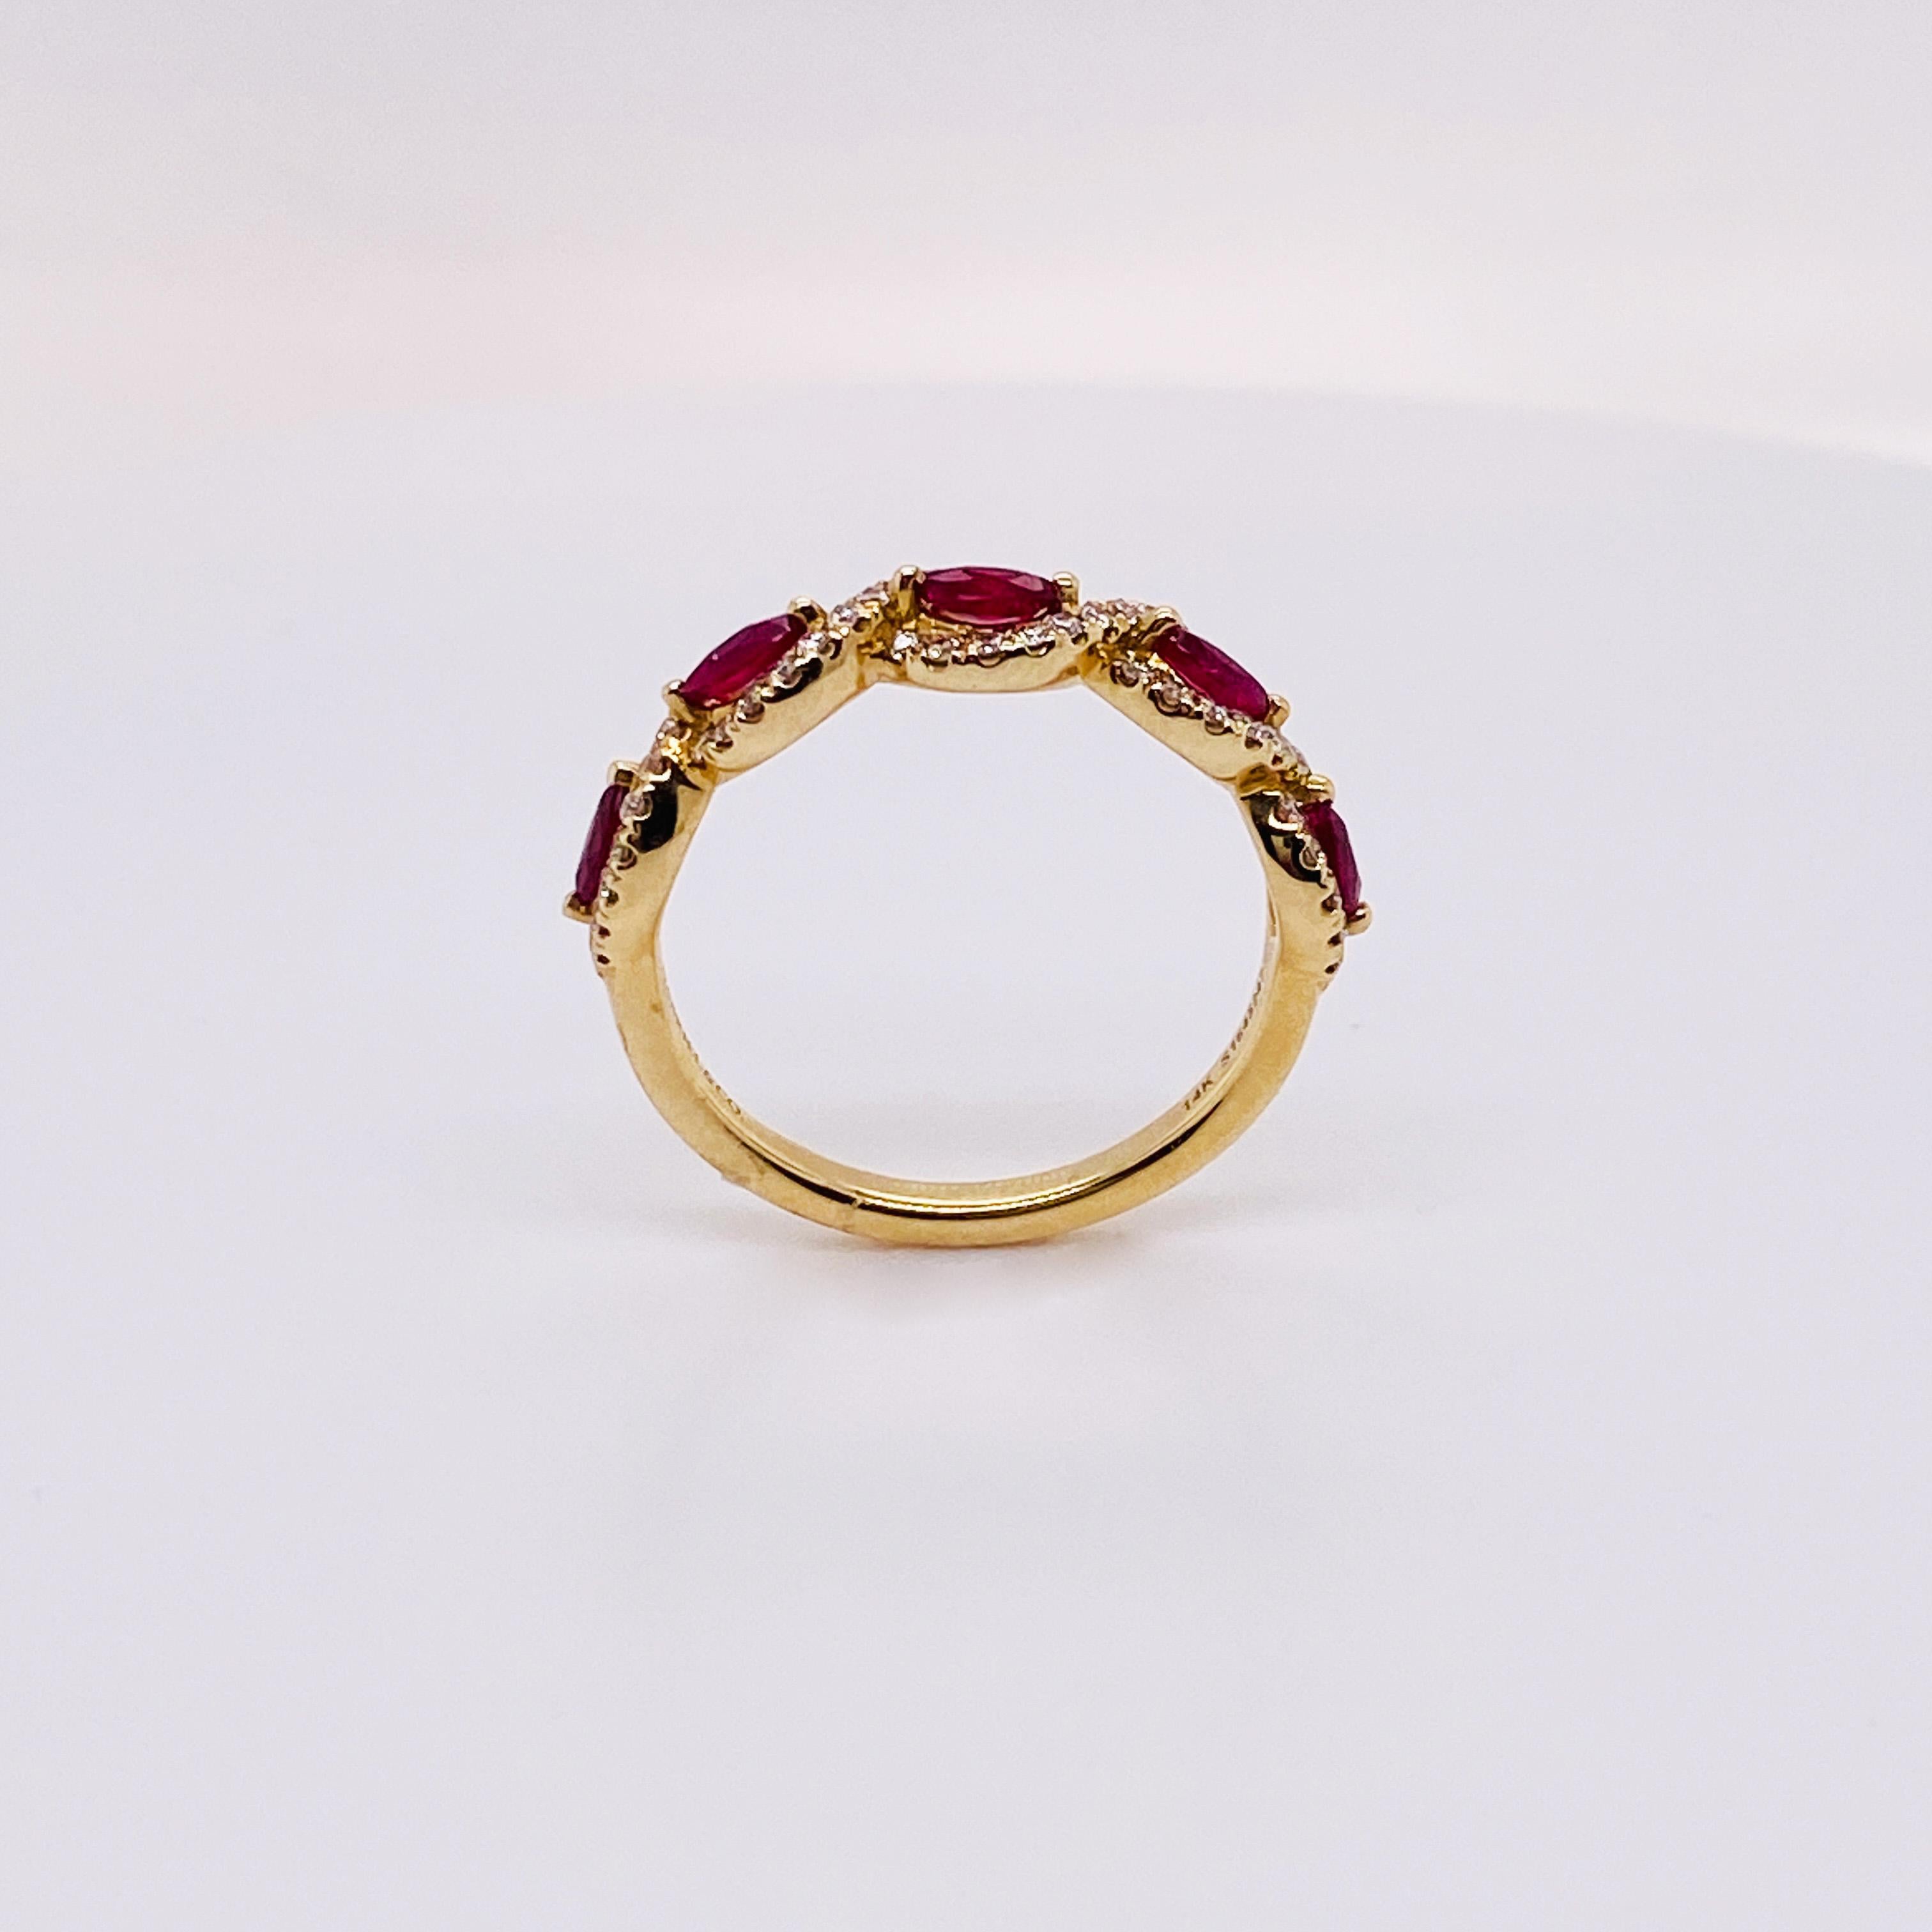 For Sale:  Ruby Marquise Diamond Twist Band in 14K Yellow Gold, 0.76 Carats LR52021 LV 5